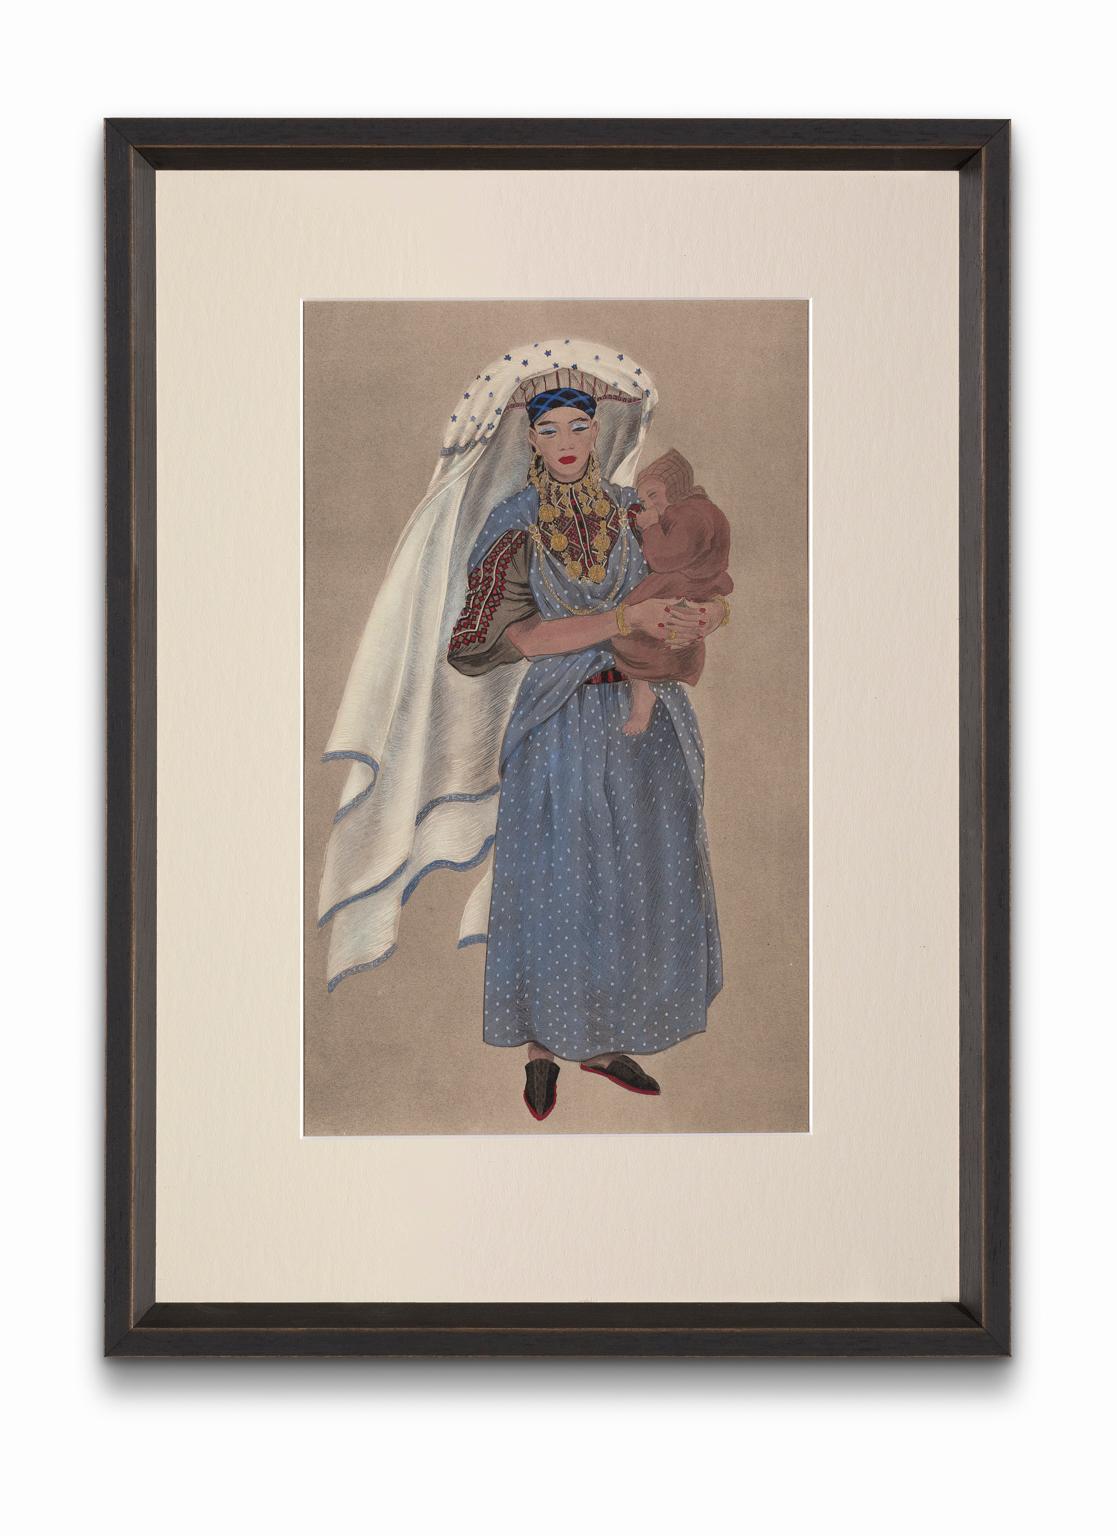 "Jewish Woman of the Tafilelt" from "Costumes of Morocco", Gouache on Paper